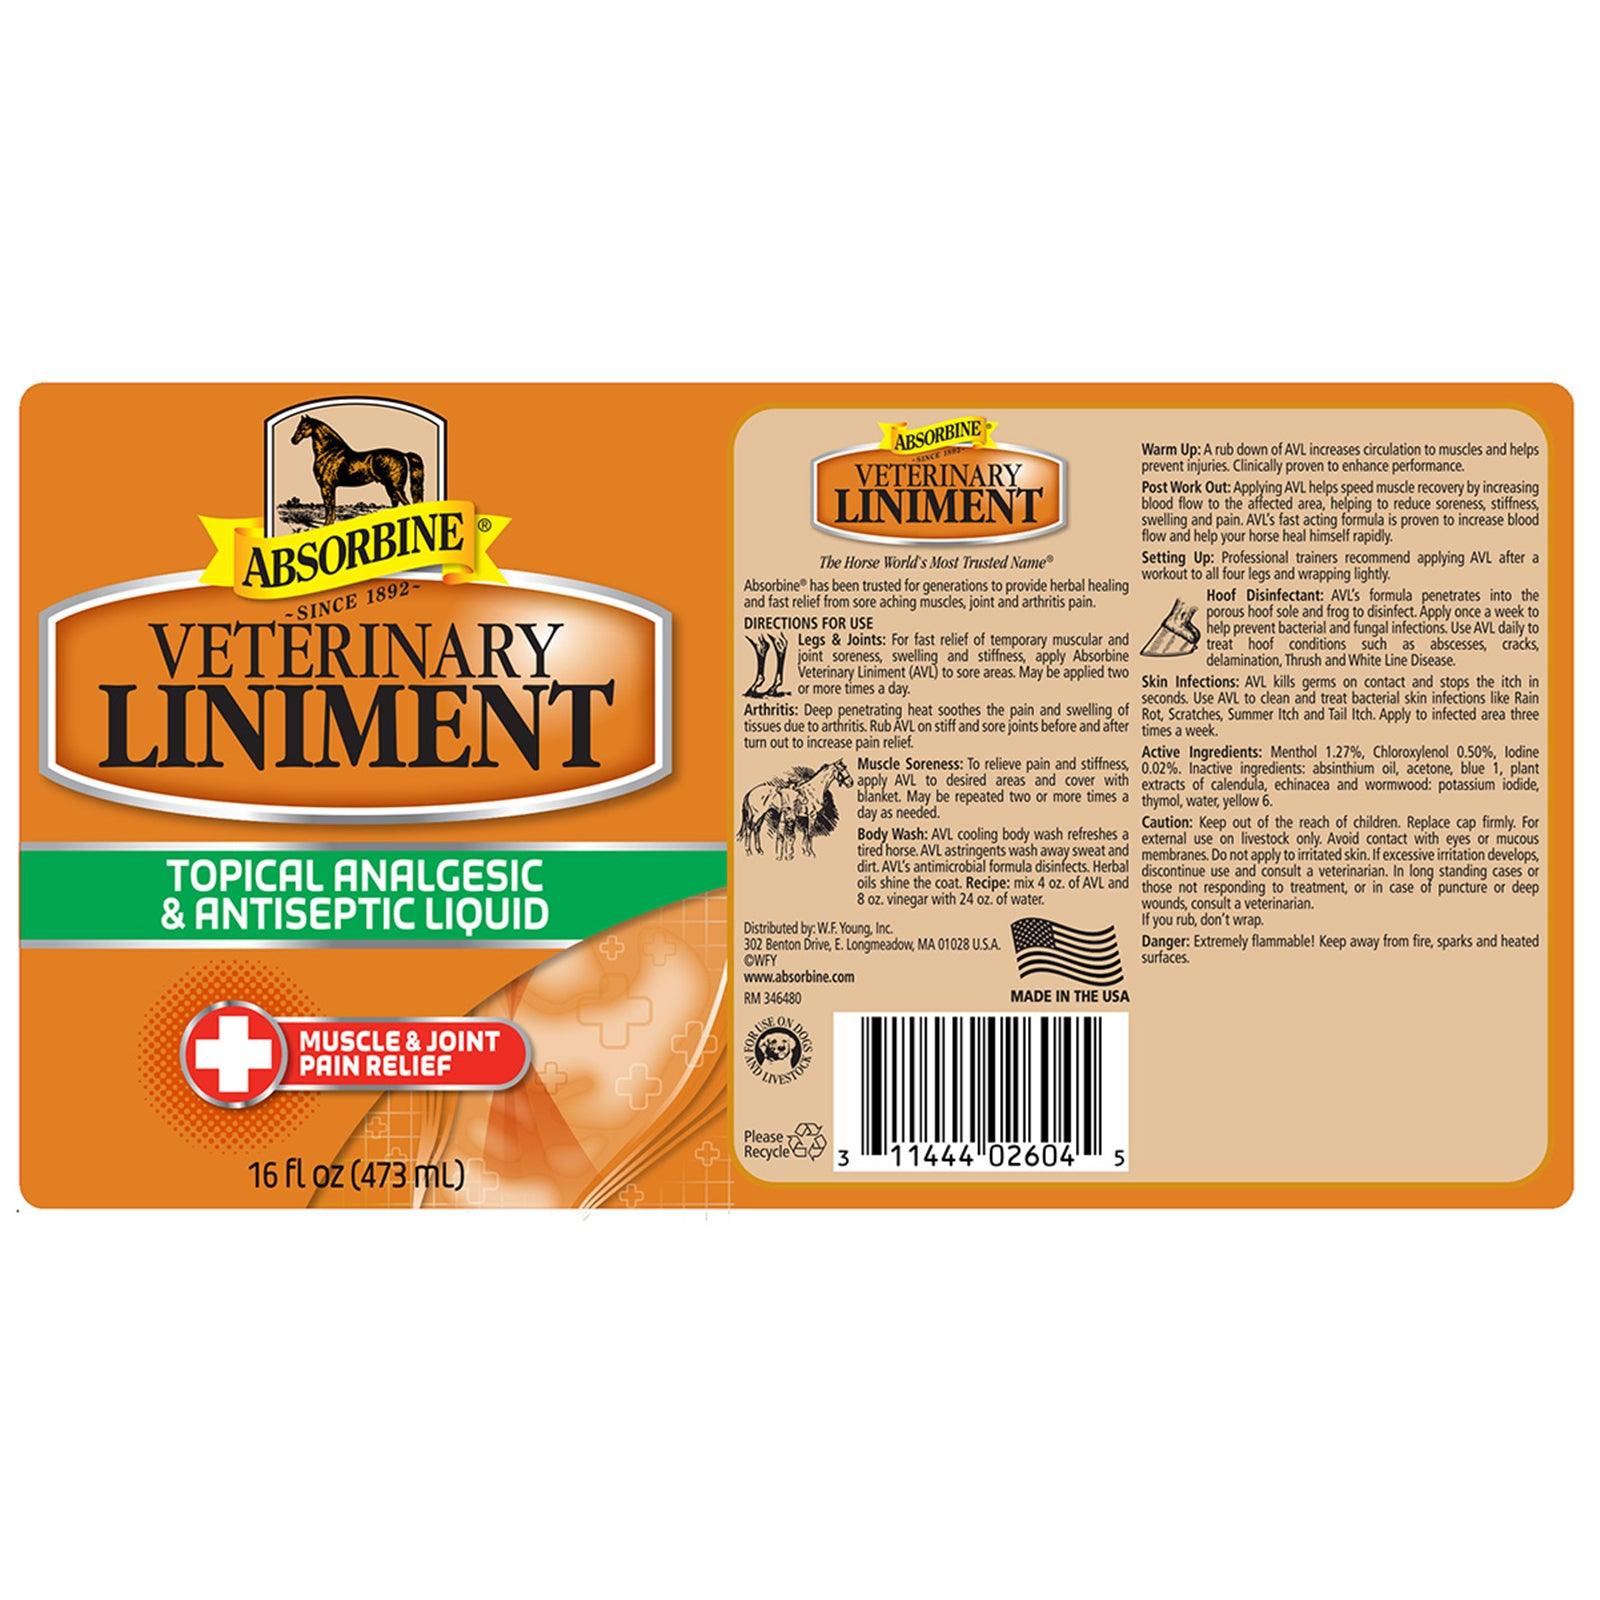 Absorbine Veterinary Liniment Muscle & joint pain relief label.